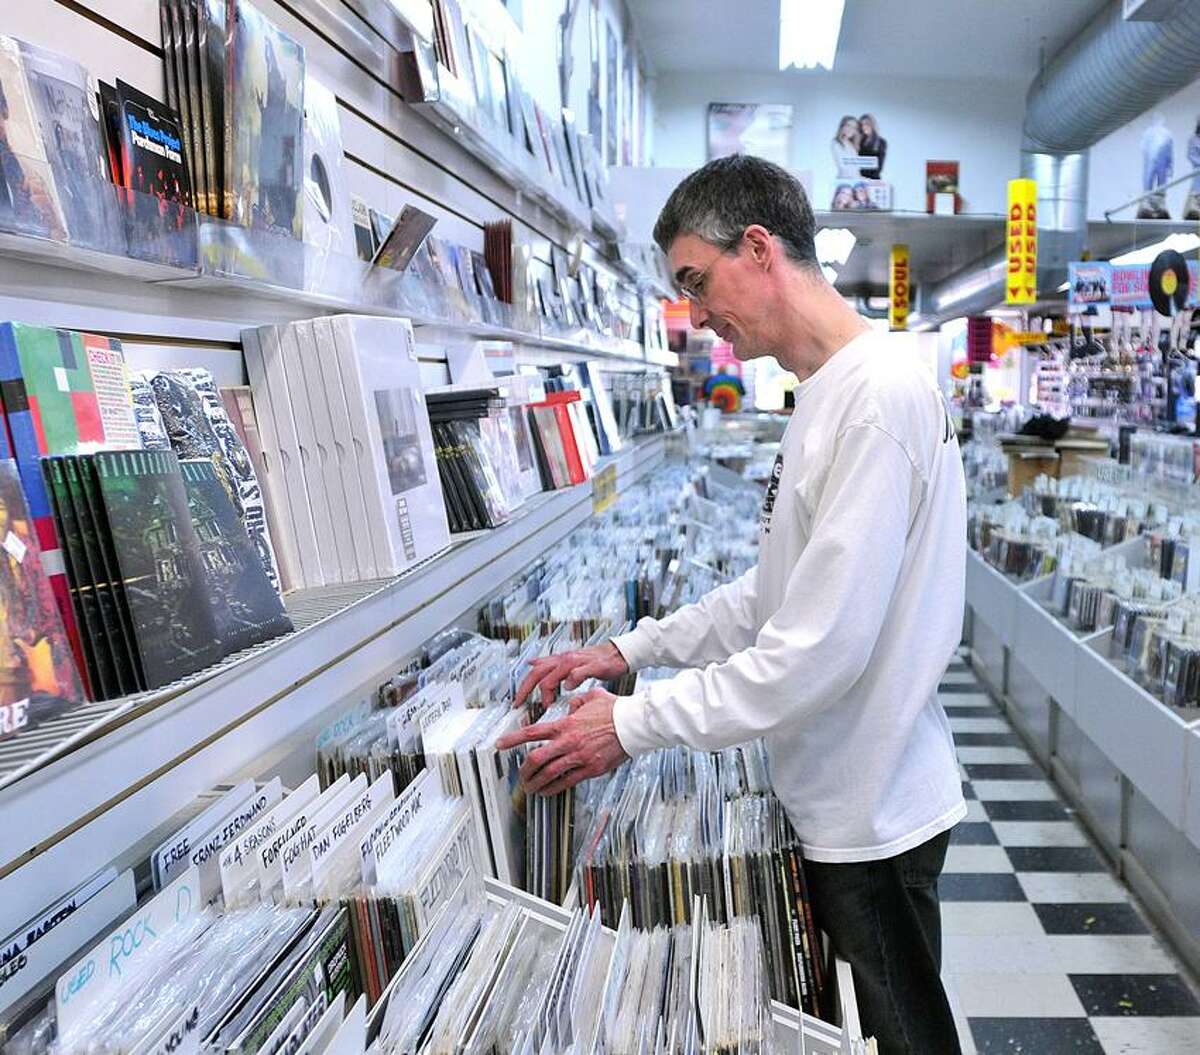 Employee Bob Briar sorts records at Cutler's Record and Tapes, which is closing at the end of June. Briar has worked at the store since 1974, when he was 17 years old. Peter Casolino/New Haven Register